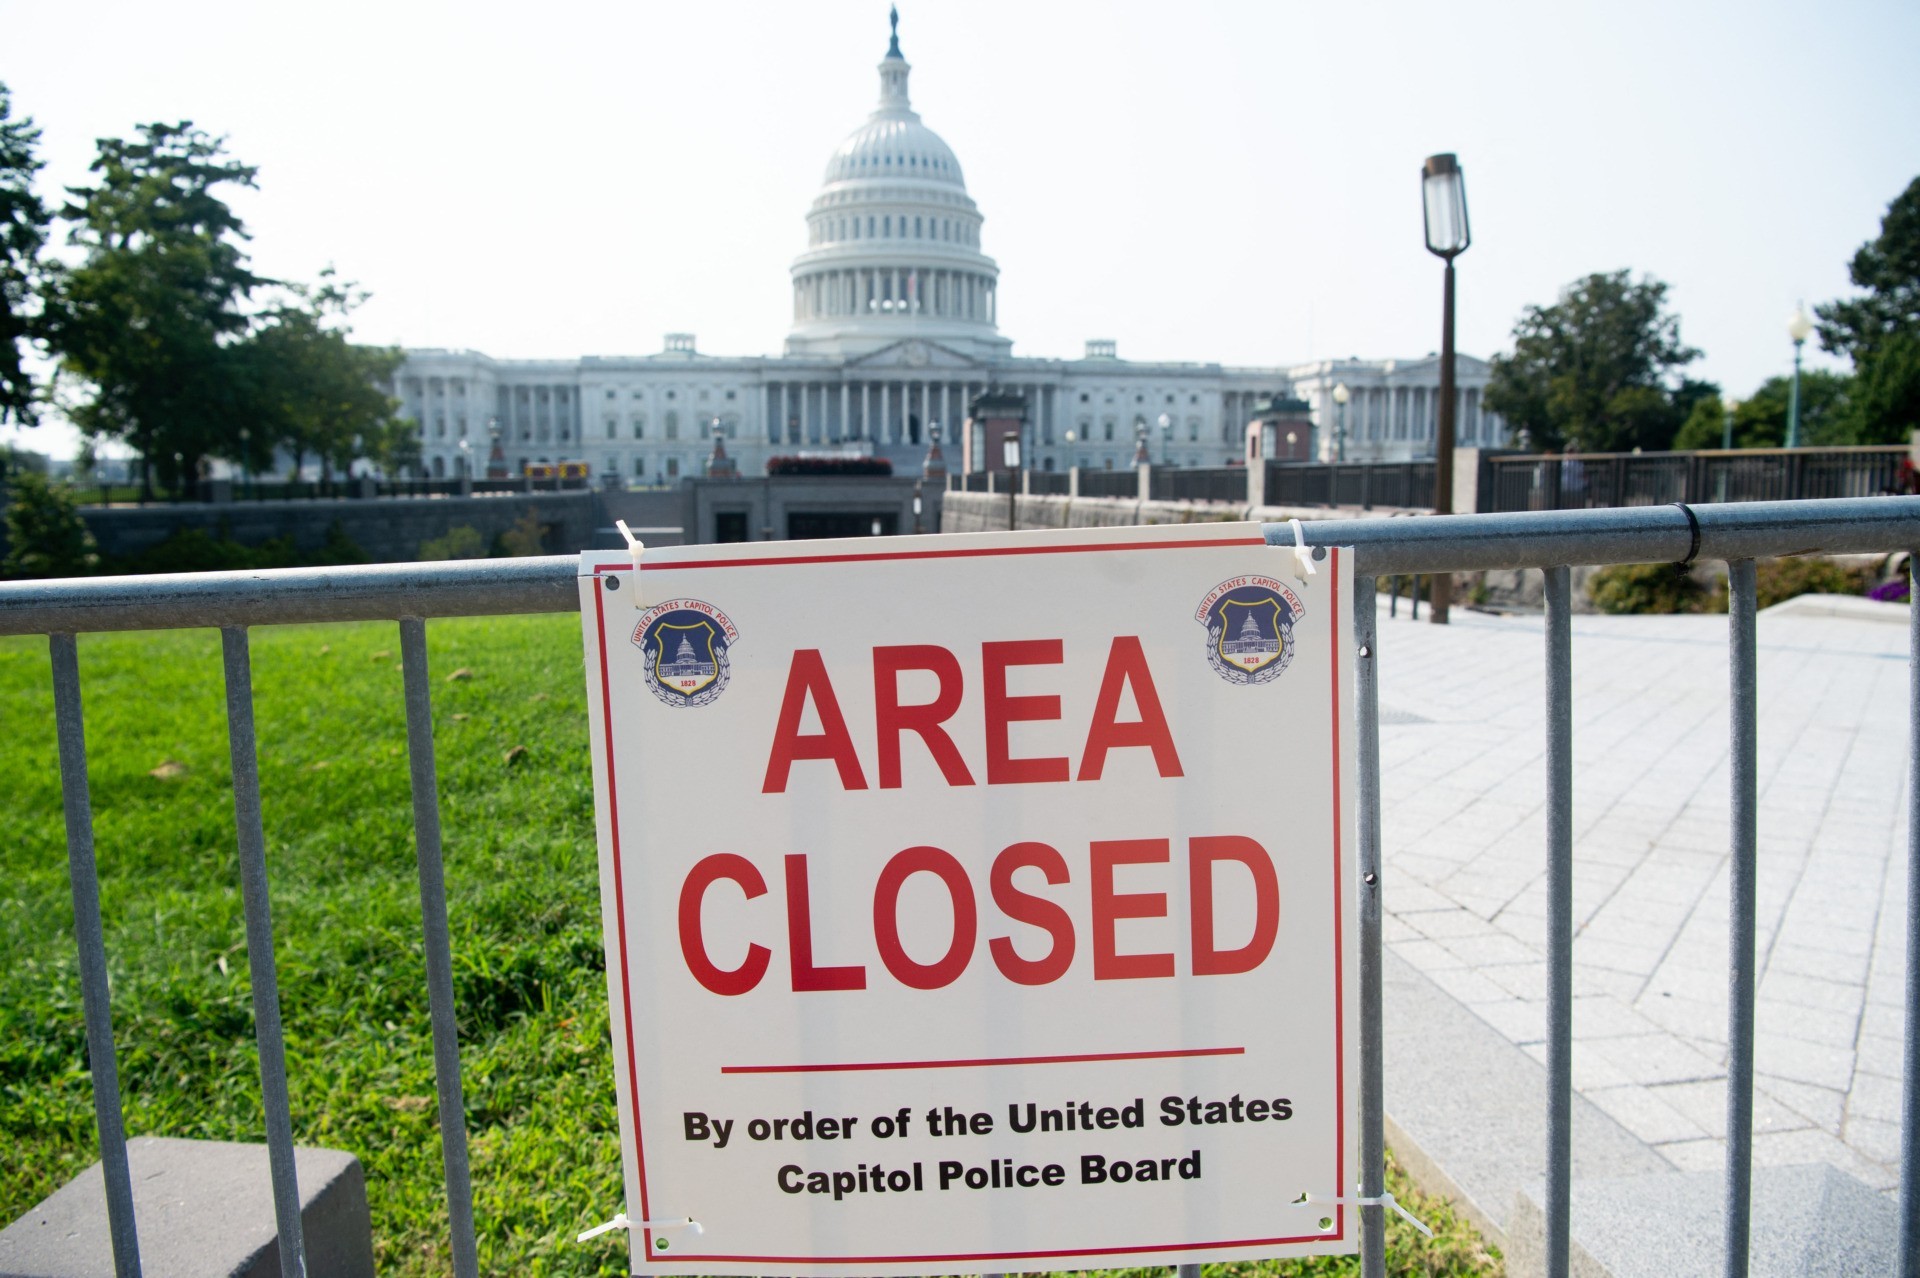 An "Area Closed" sign appears on temporary security fencing outside the US Capitol in Washington, DC, September 13, 2021, as security increases ahead of the planned September 18 rally in support of the January 6 insurrectionists on Capitol Hill. (Photo by SAUL LOEB / AFP) (Photo by SAUL LOEB/AFP via Getty Images)